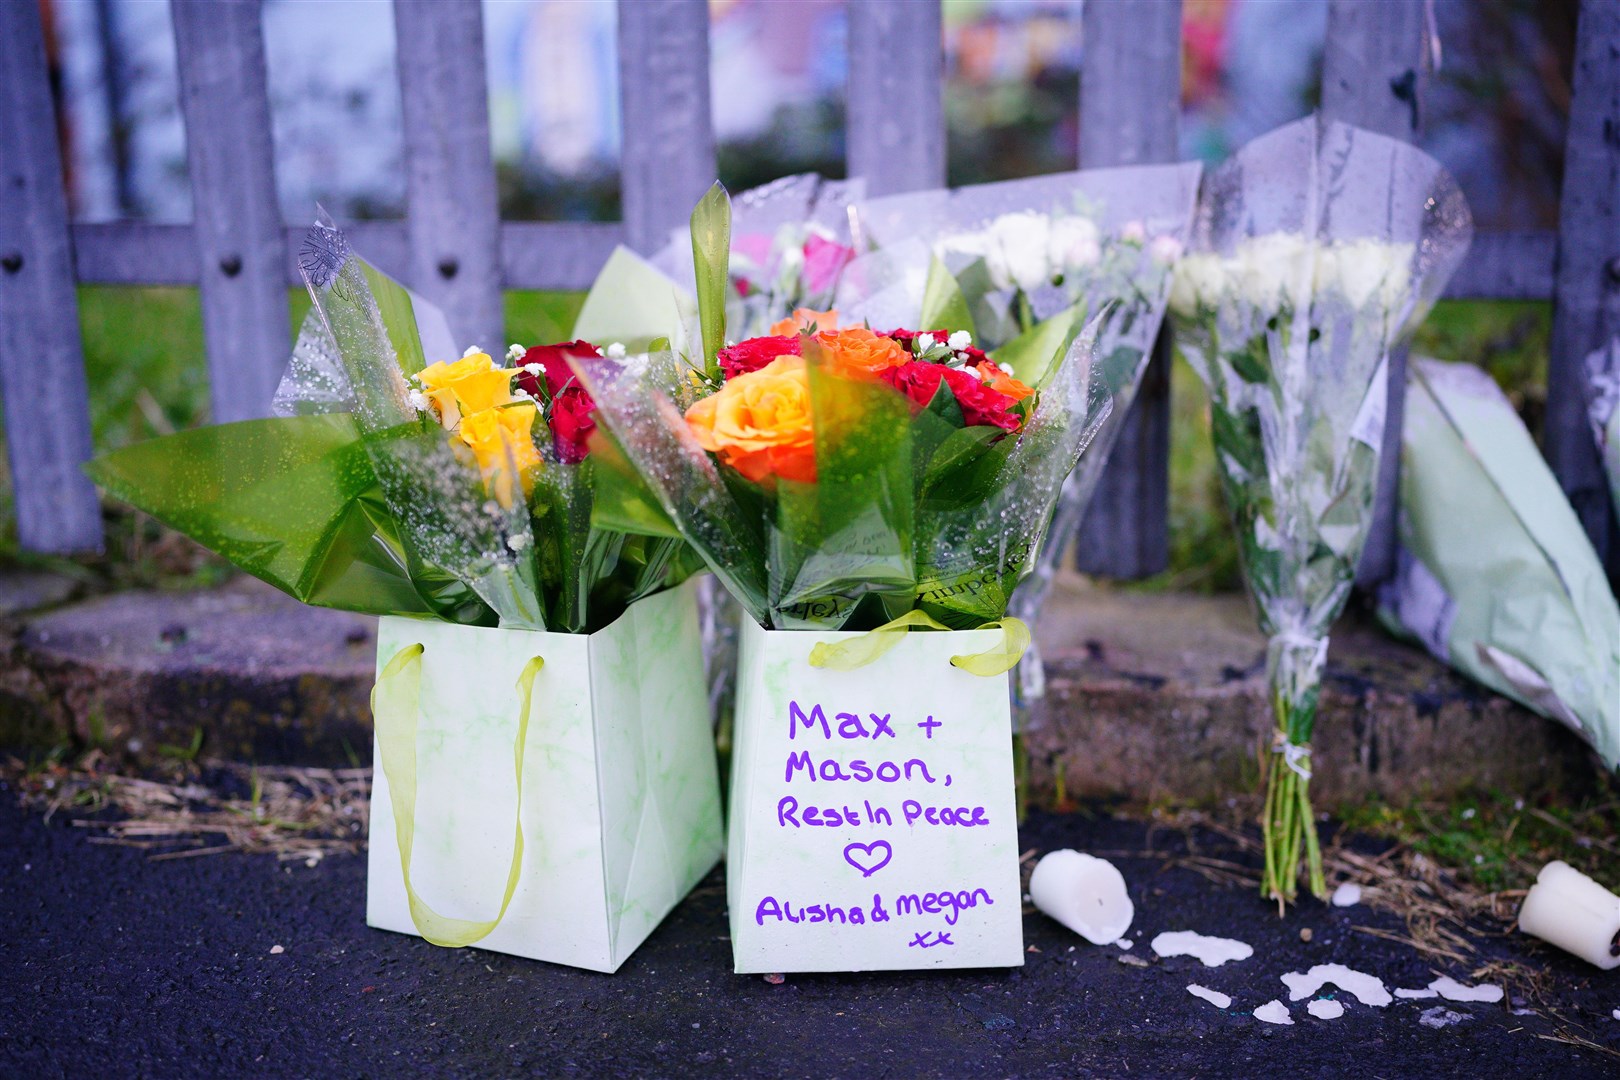 People have been leaving tributes at the scene (Ben Birchall/PA)